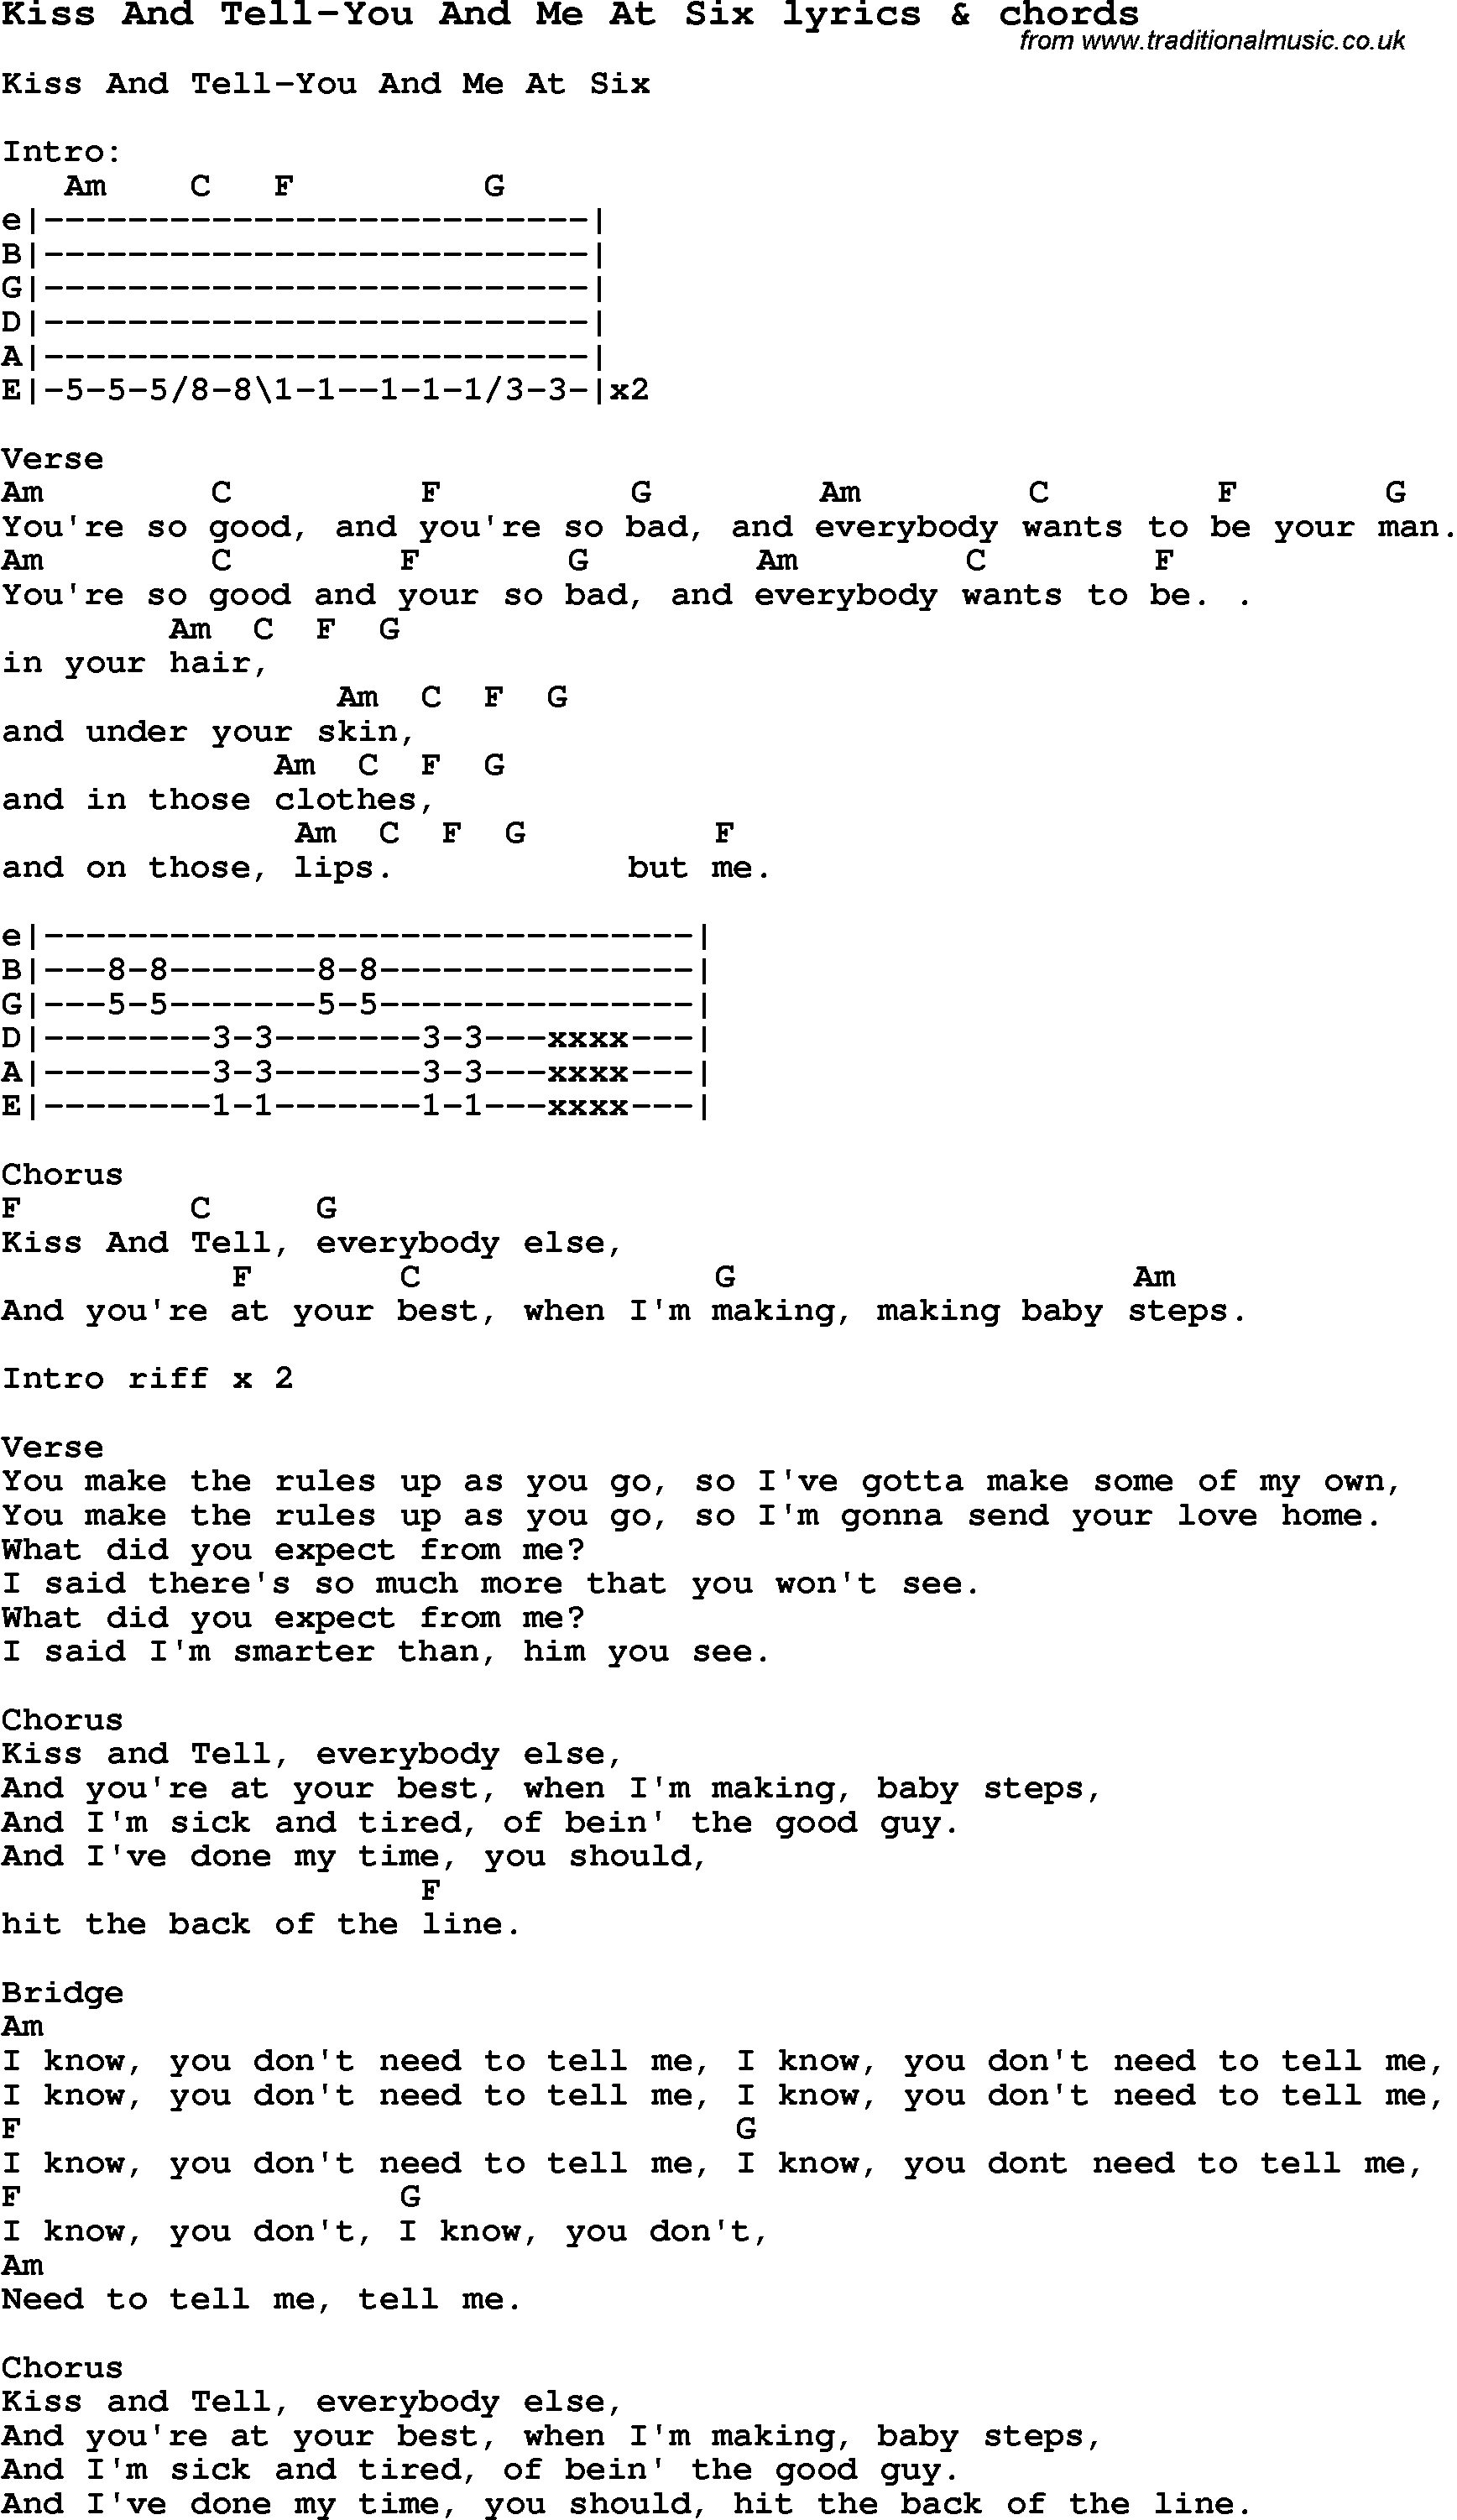 Love Song Lyrics for: Kiss And Tell-You And Me At Six with chords for Ukulele, Guitar Banjo etc.